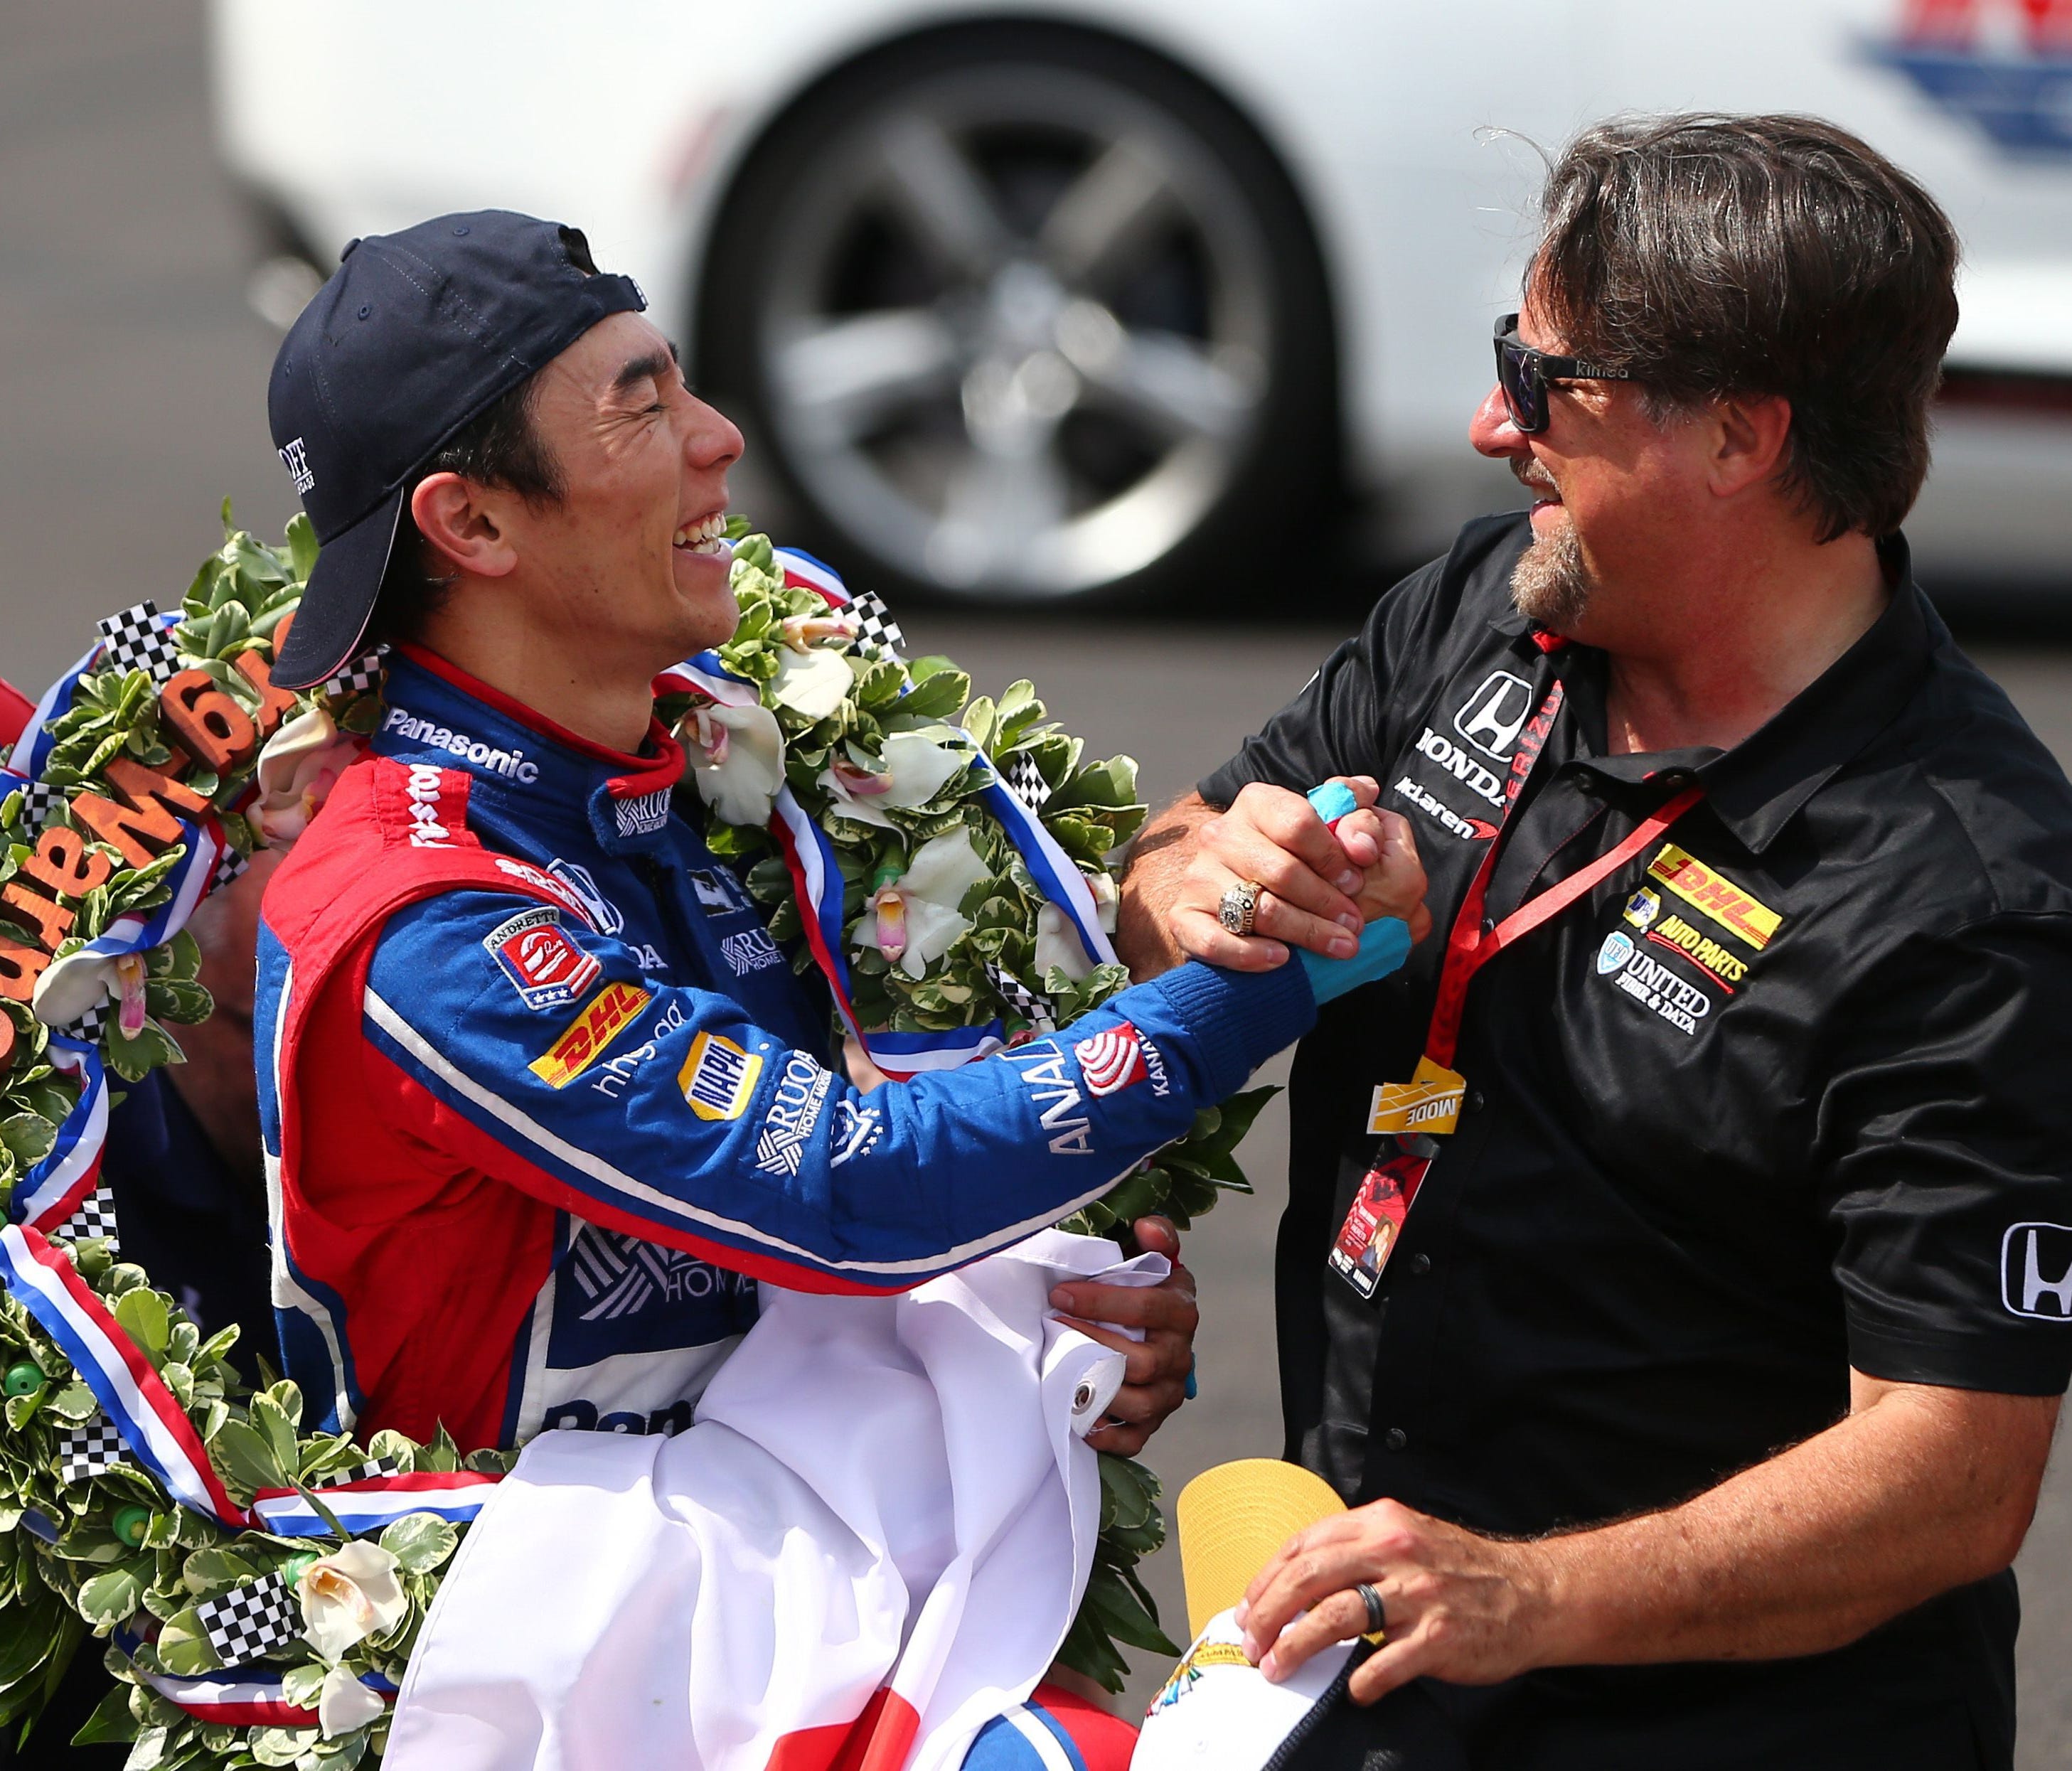 IndyCar Series driver Takuma Sato (left) celebrates with team owner Michael Andretti (right) after winning the 101st Running of the Indianapolis 500 at Indianapolis Motor Speedway.